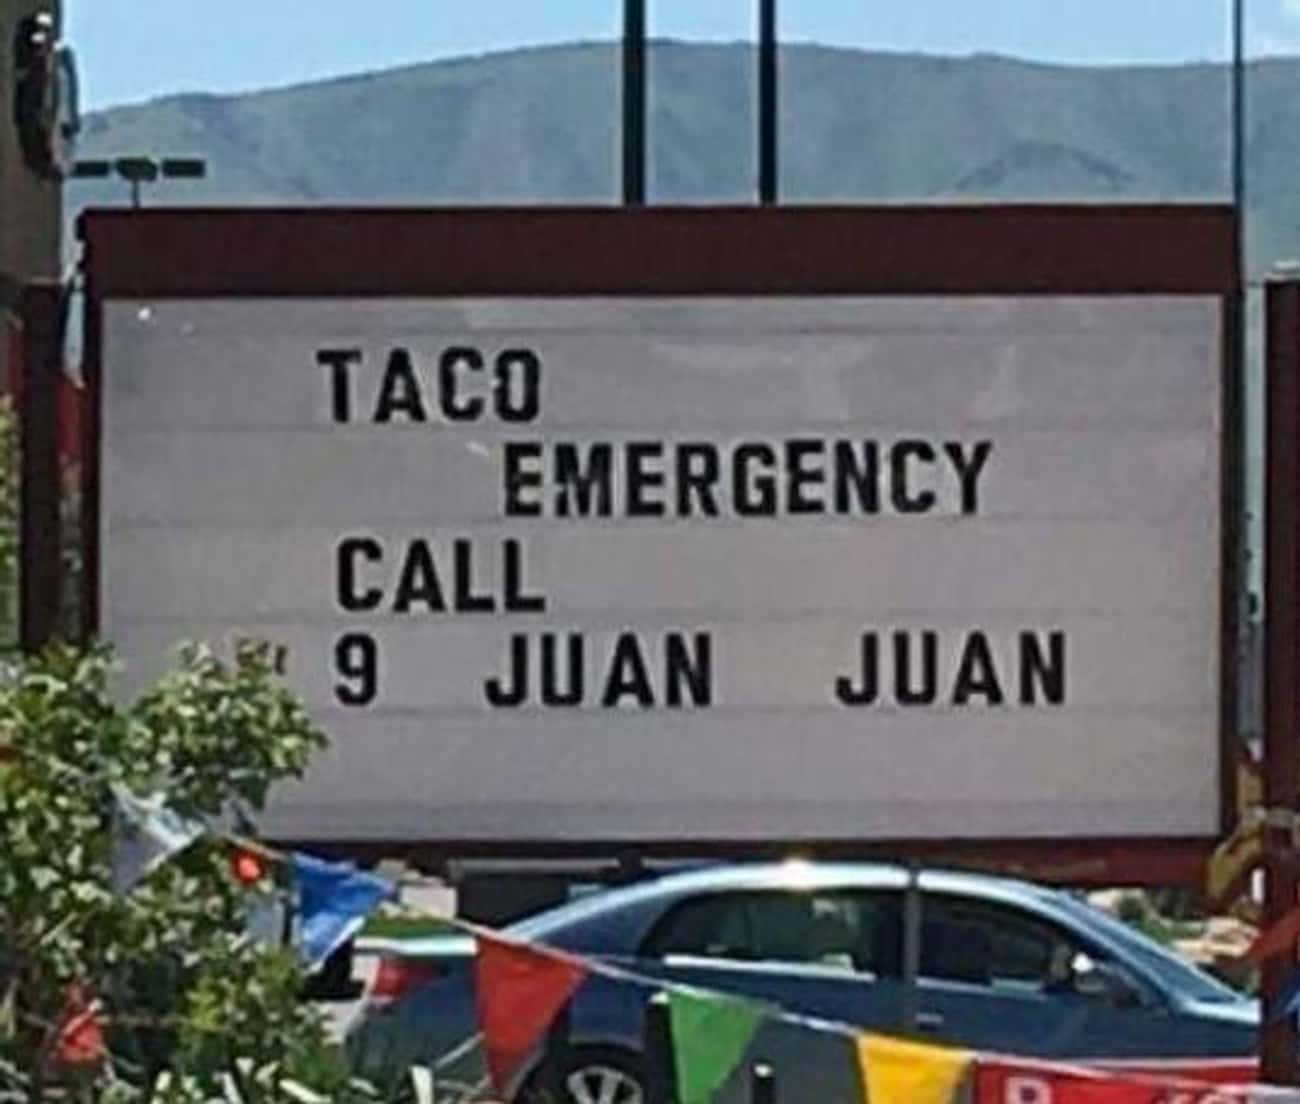 For Taco Emergencies Only